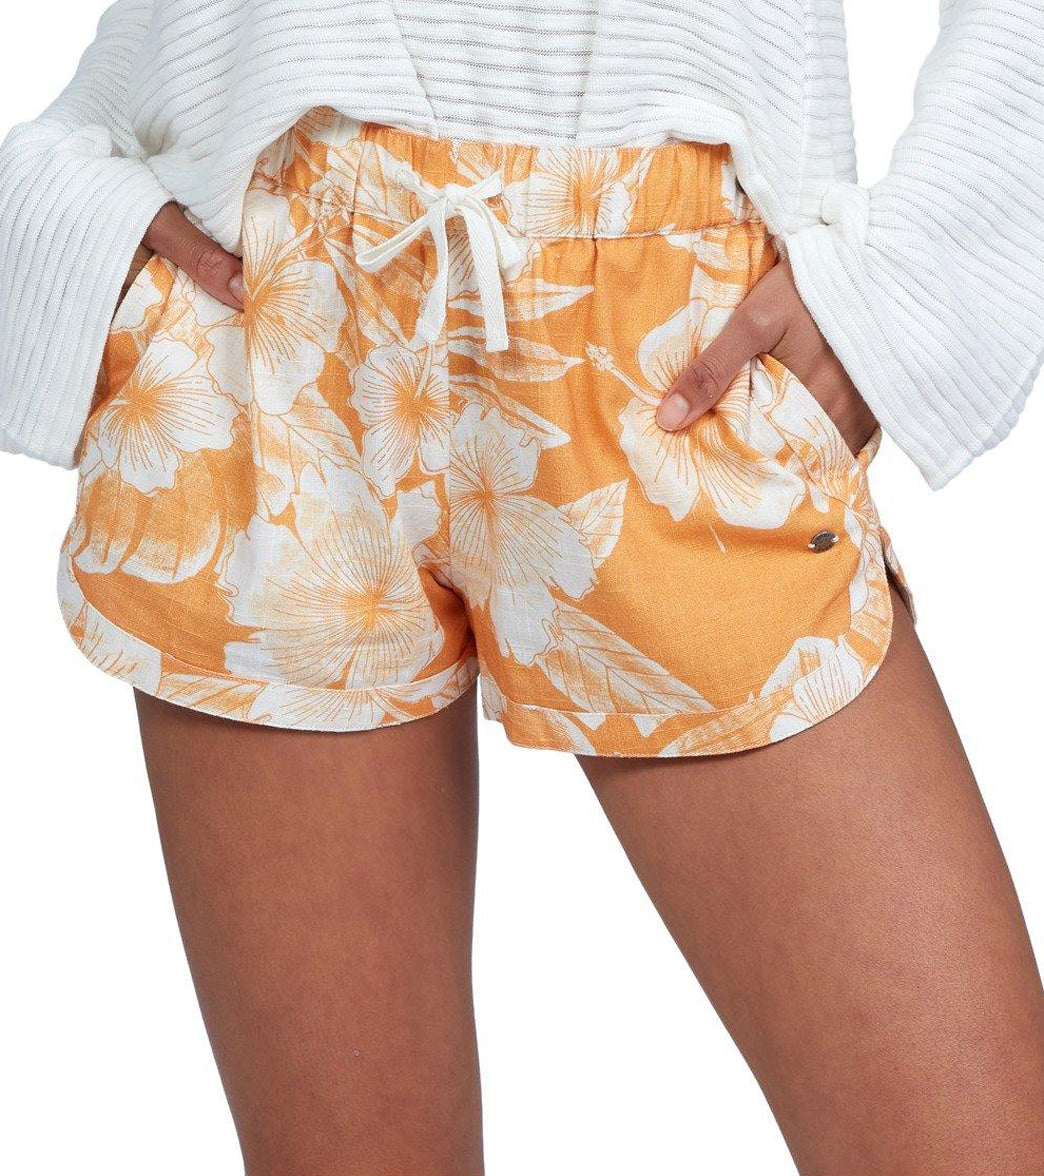 Roxy Women's There You Are Printed Short - Beach Glass Aloha Large - Swimoutlet.com